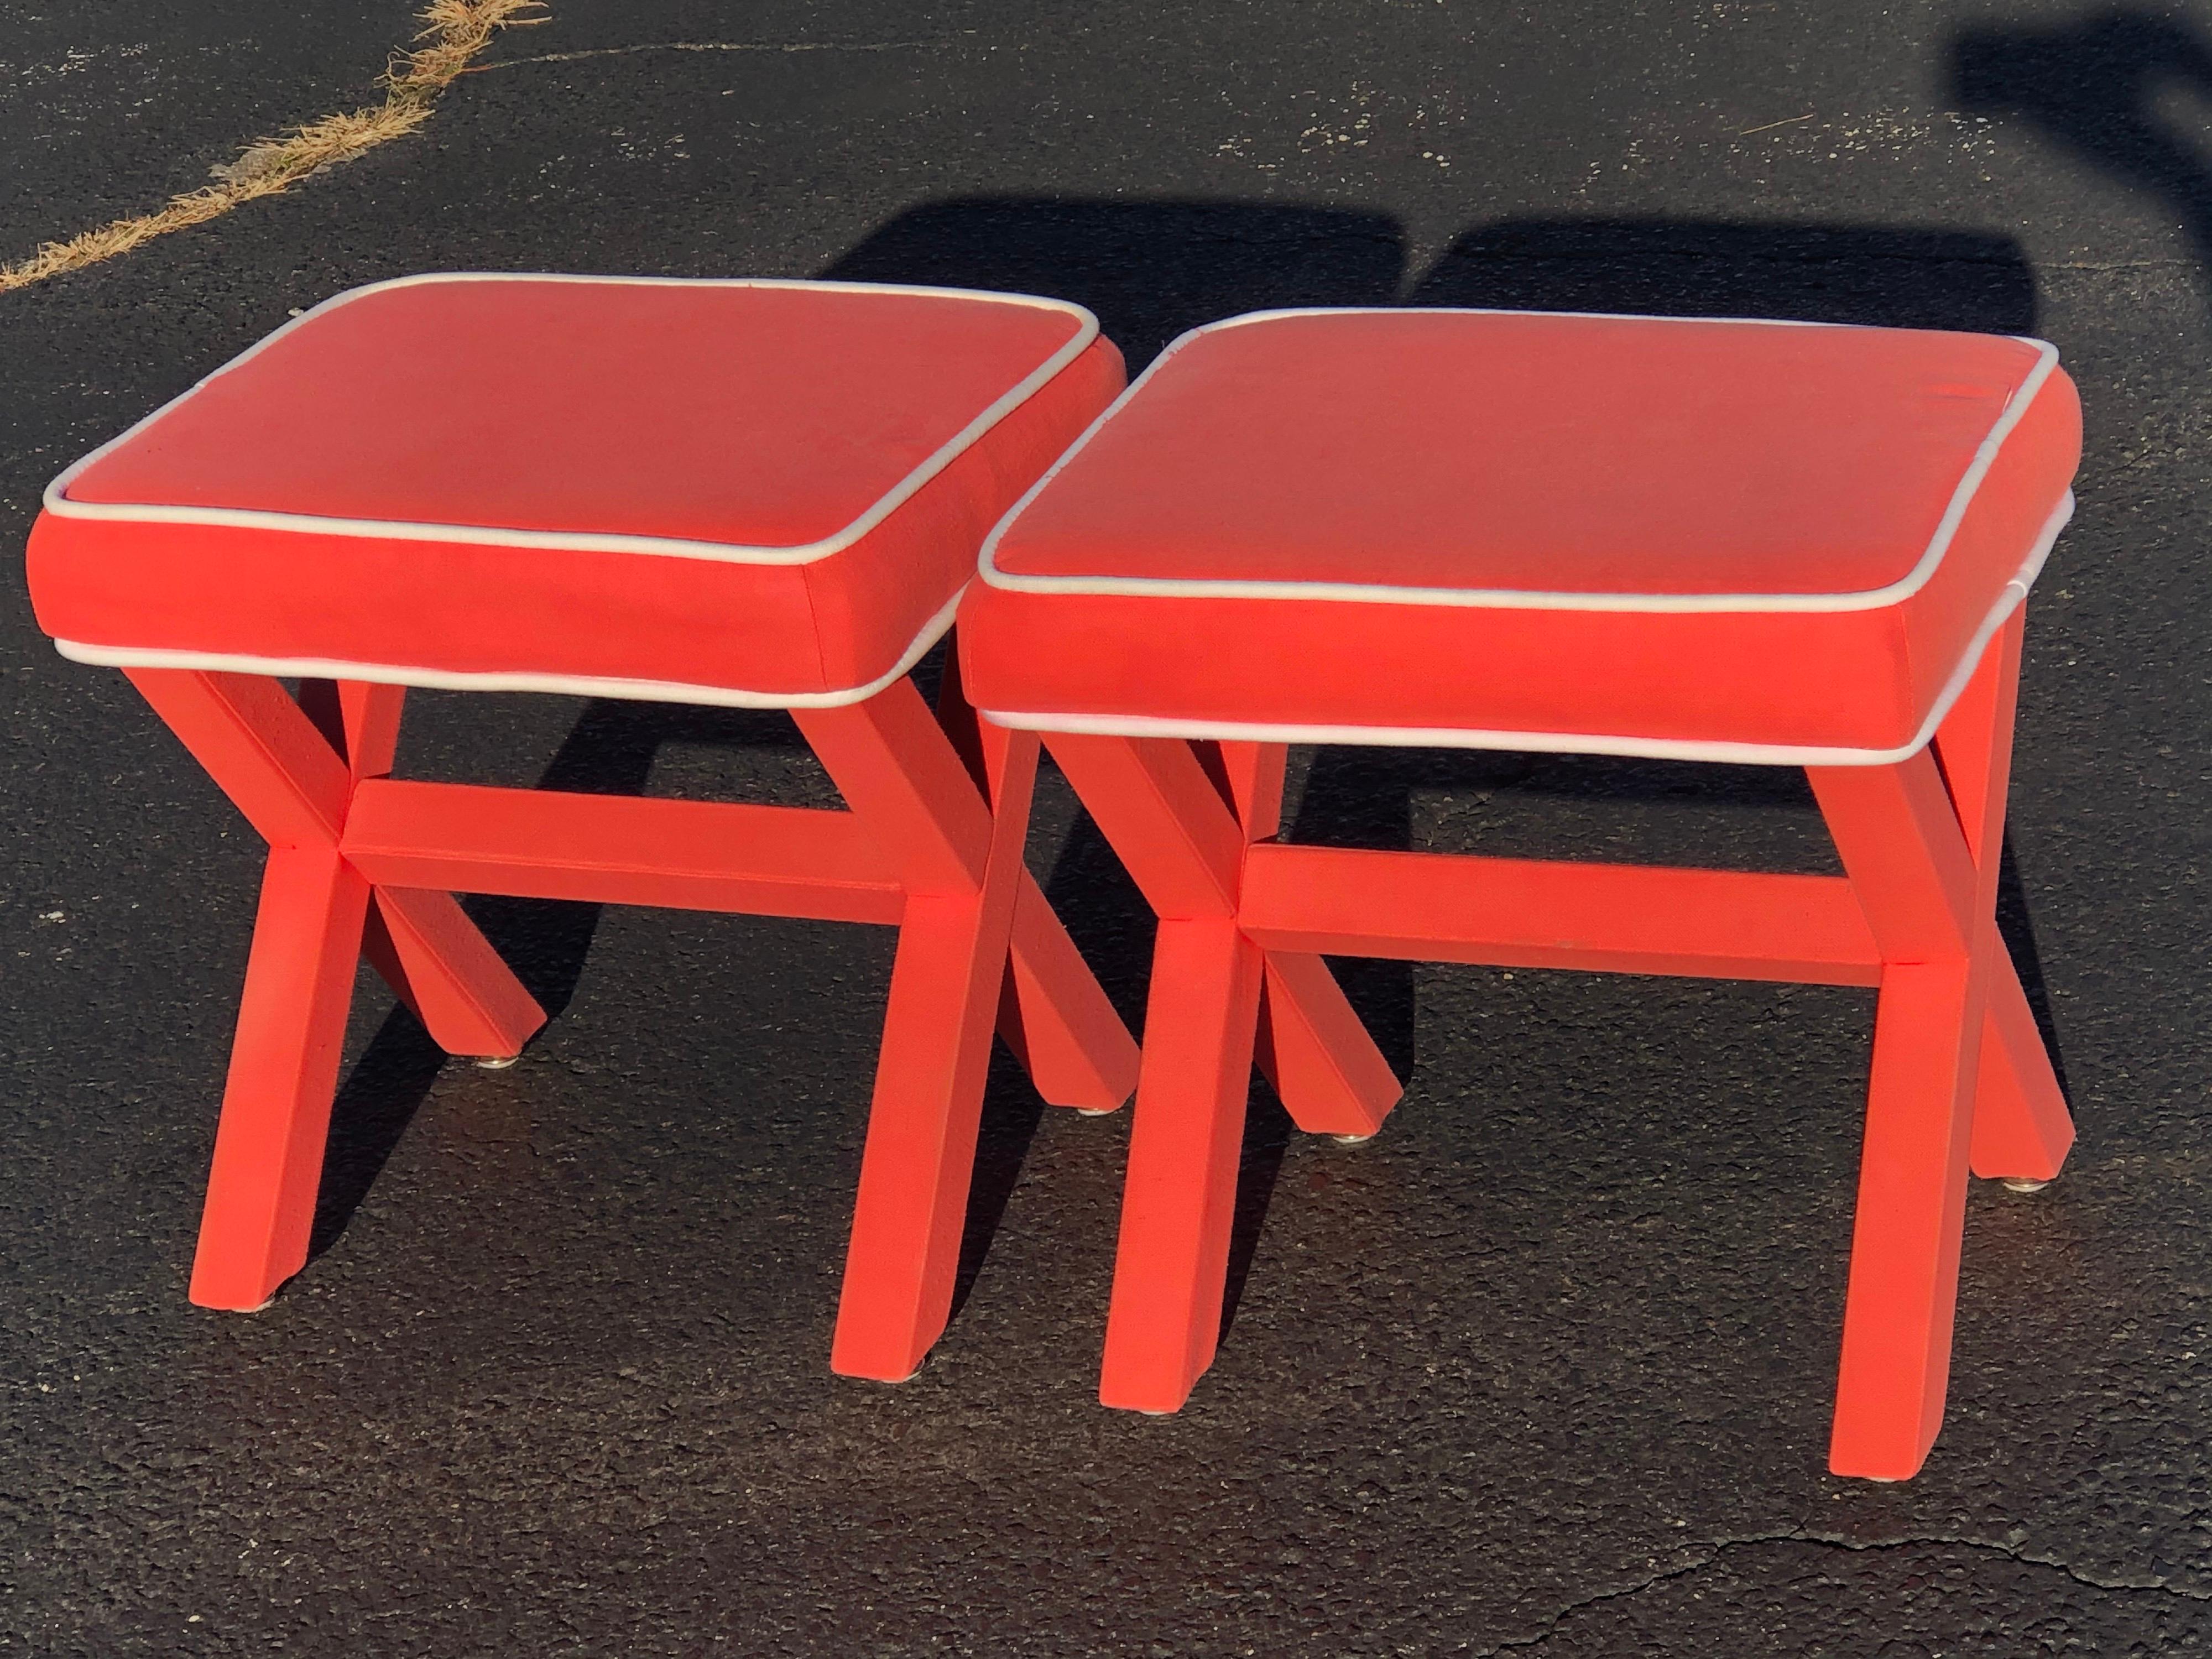 Pair of Billy Baldwin style X base stools. Hot pink/salmon color with white piping. Perfect for under a console table or in a bedroom. This item will parcel ship for $75